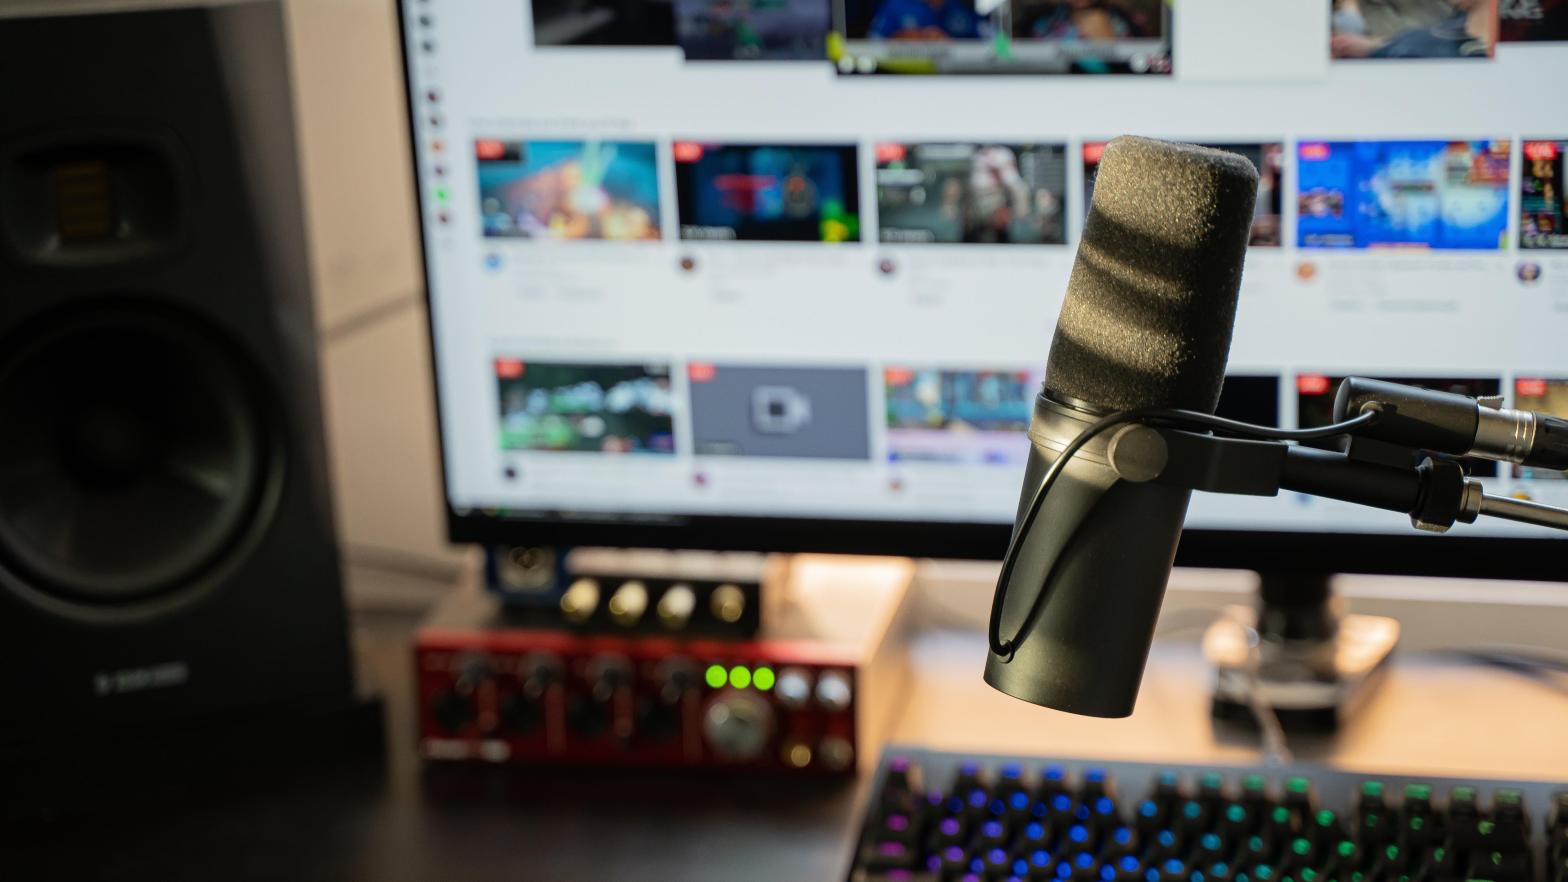 Twitch said it is creating a new phone number verification system to stop streams from young people under 13-years-old, but it did not exactly explain how that system will work. (Photo: Devon Deth, Shutterstock)